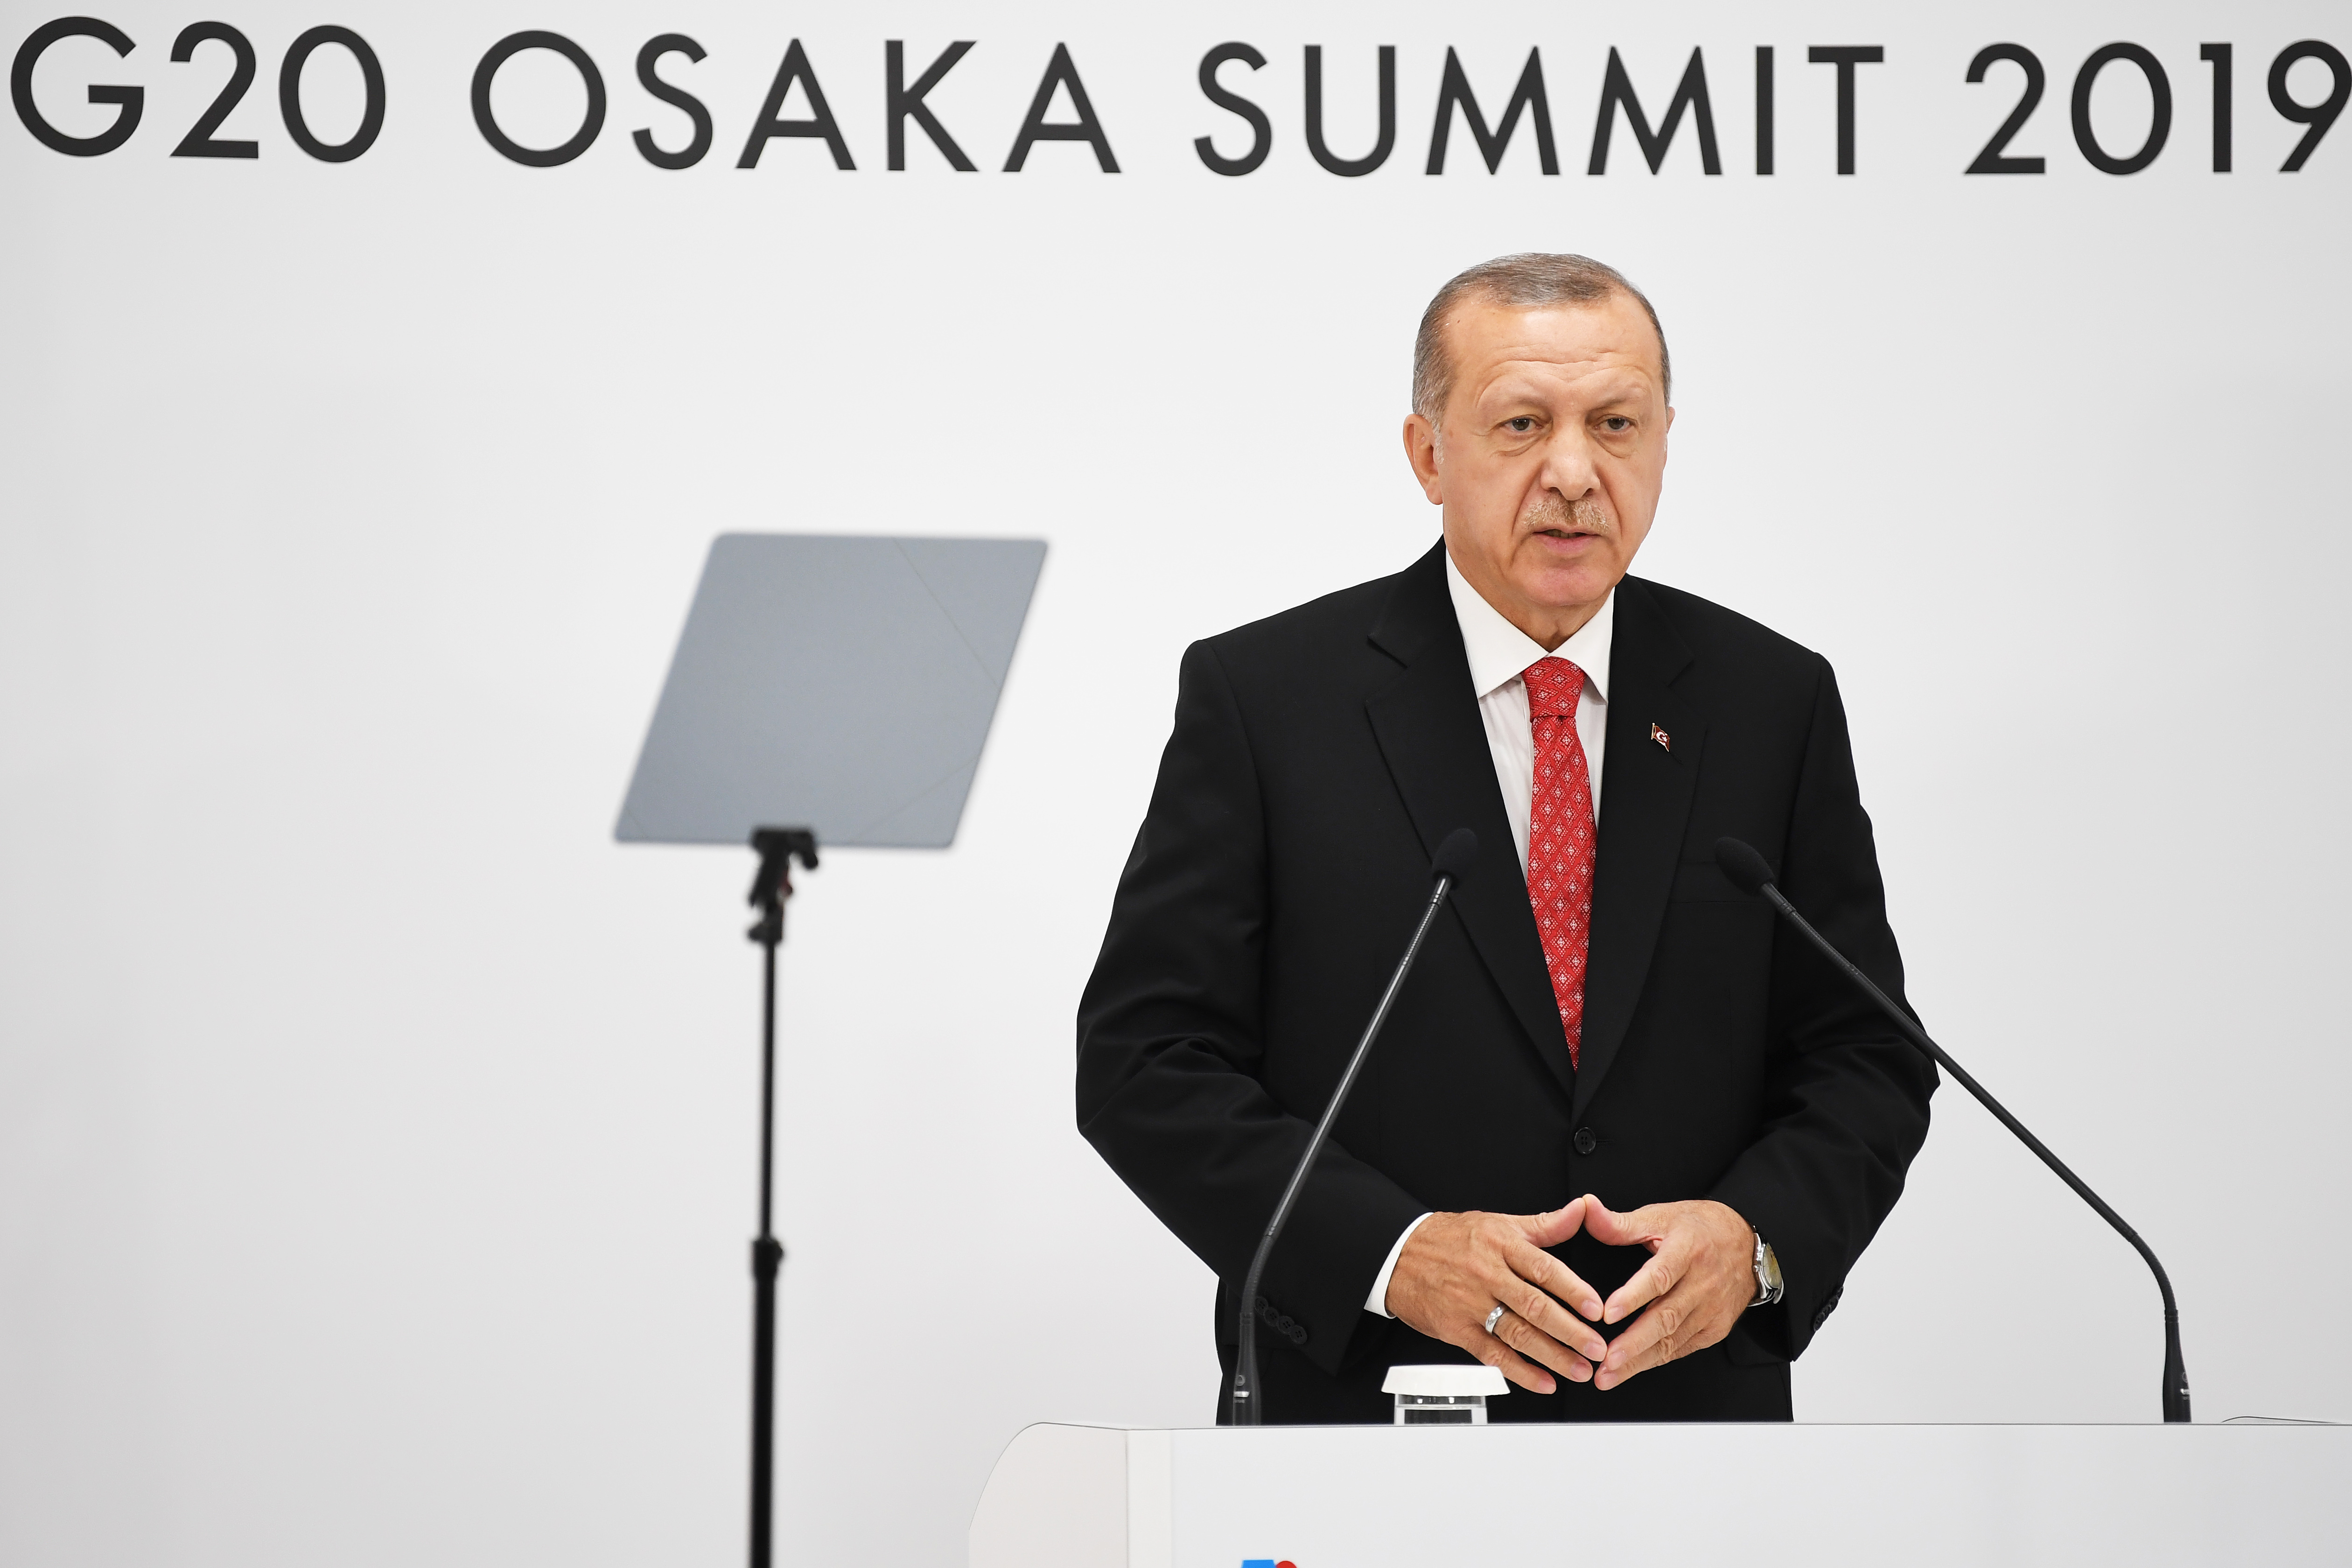 Turkish President Recep Tayyip Erdogan speaking at a news conference following the G20.